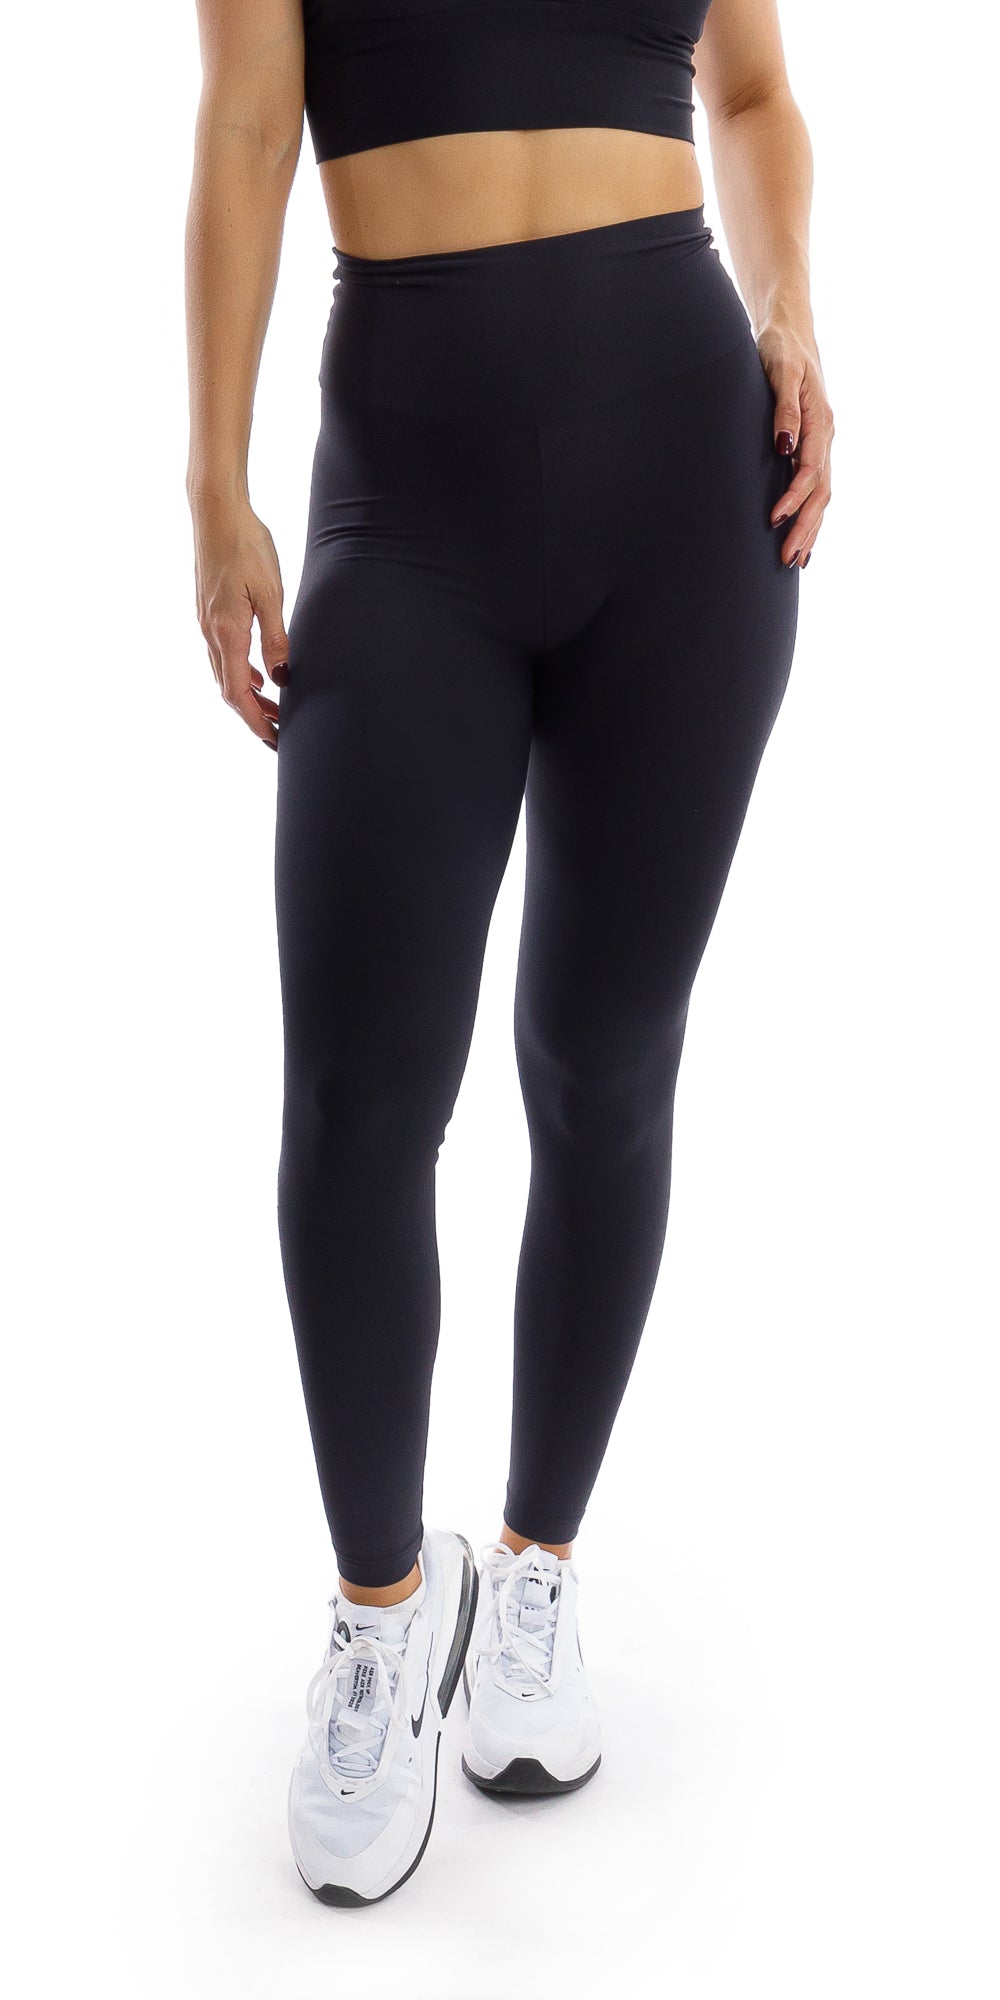 Tall Black High Waisted Gym Ruched Bum Leggings